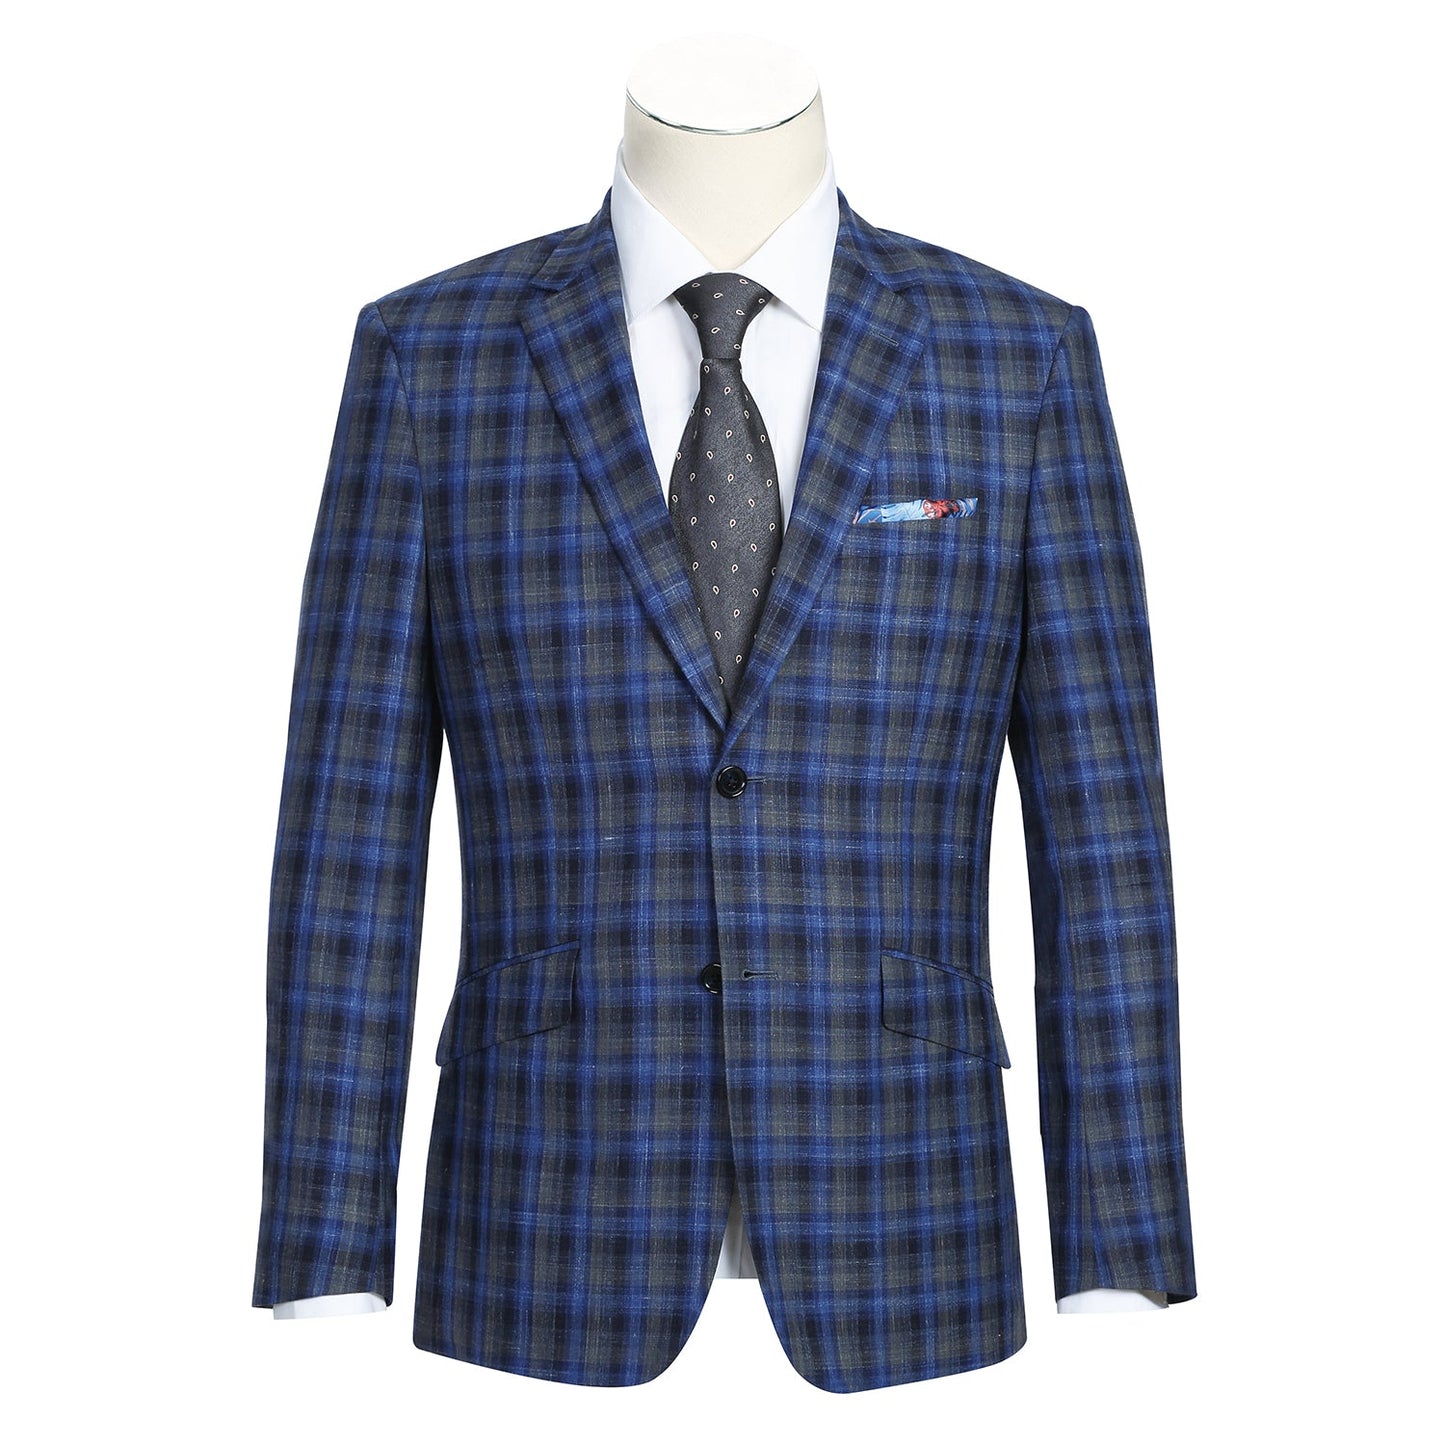 563-1 Men's Slim Fit Wool and Linen Blend Blue and Grey Plaid Sport Coat